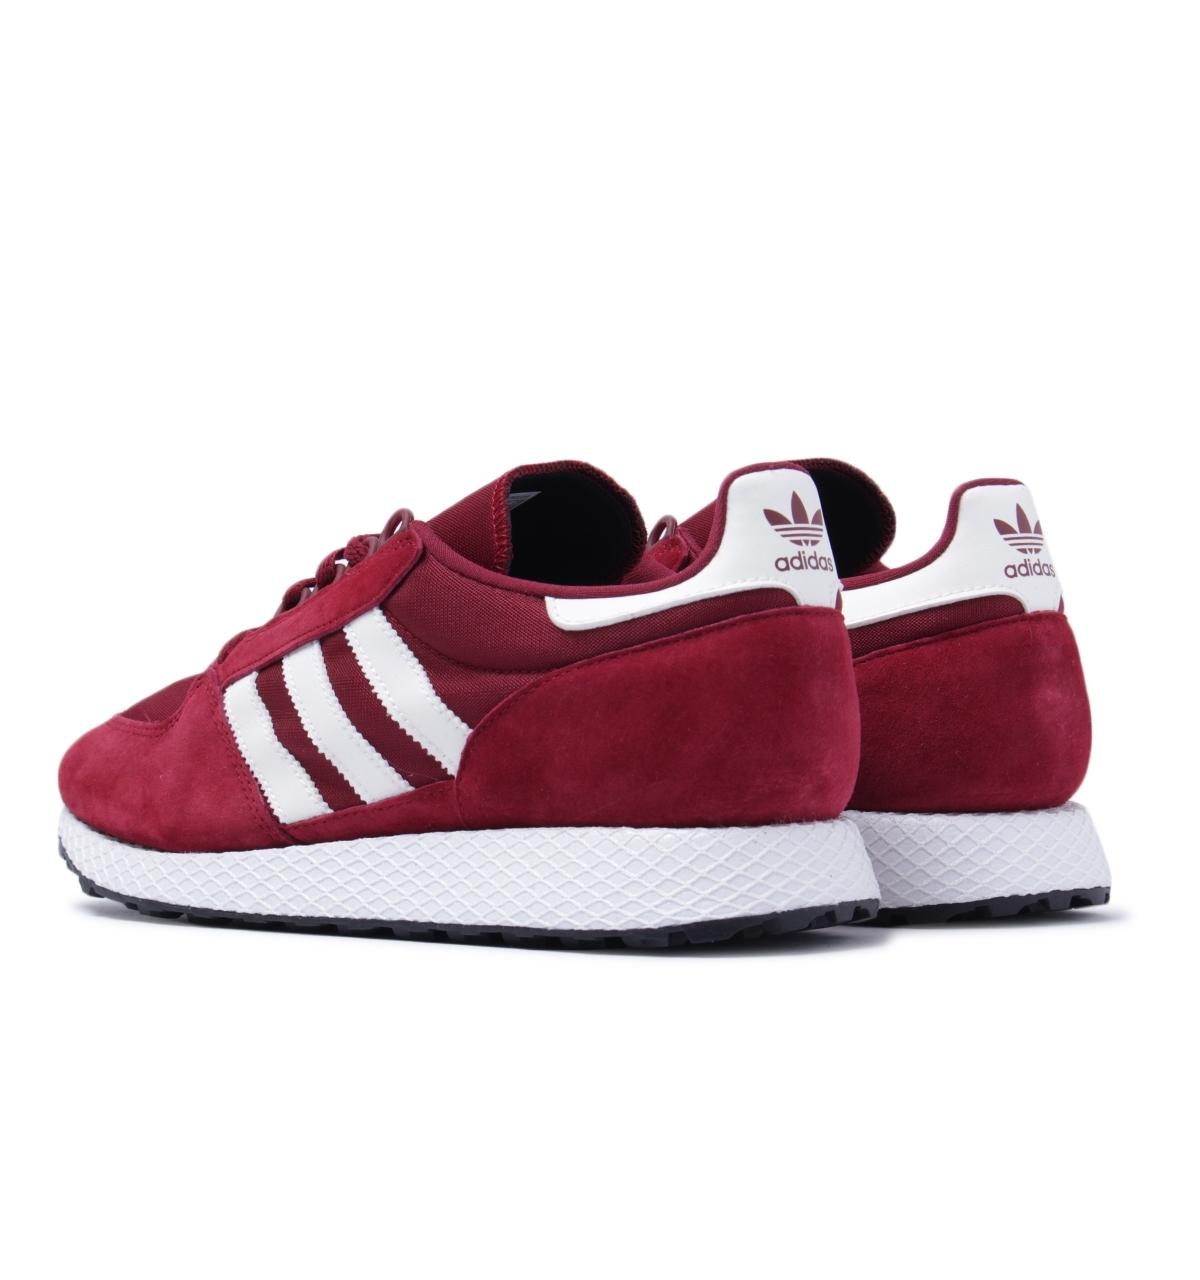 adidas Originals Synthetic Forest Grove Burgundy Trainers in Red for Men -  Lyst